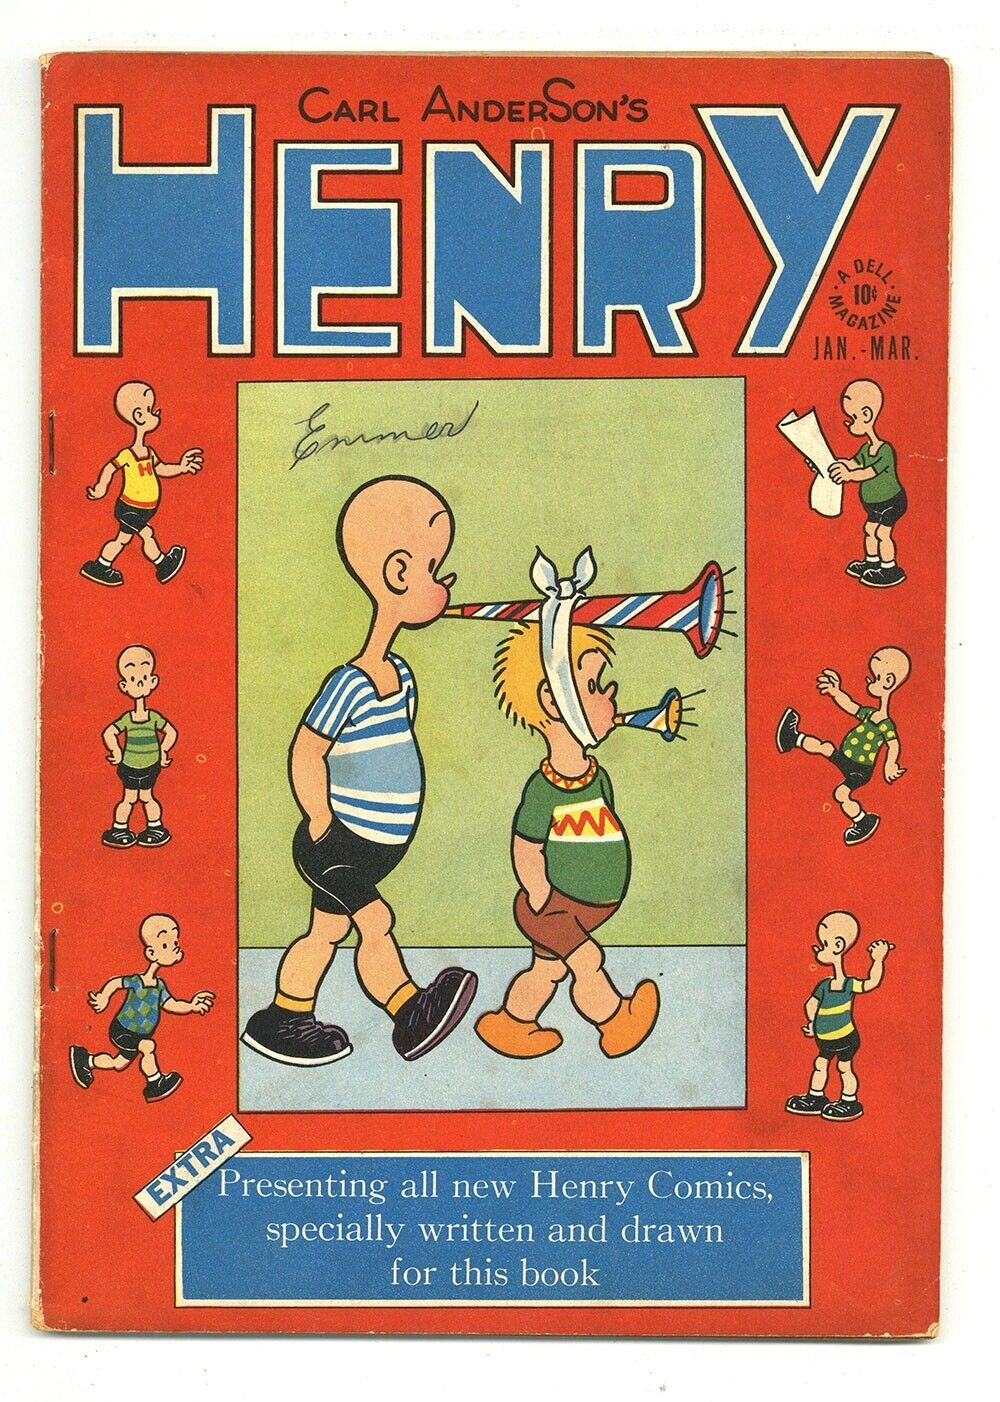 HENRY #1 4.0 CARL ANDERSON GOLDEN AGE DELL OW PGS 1948